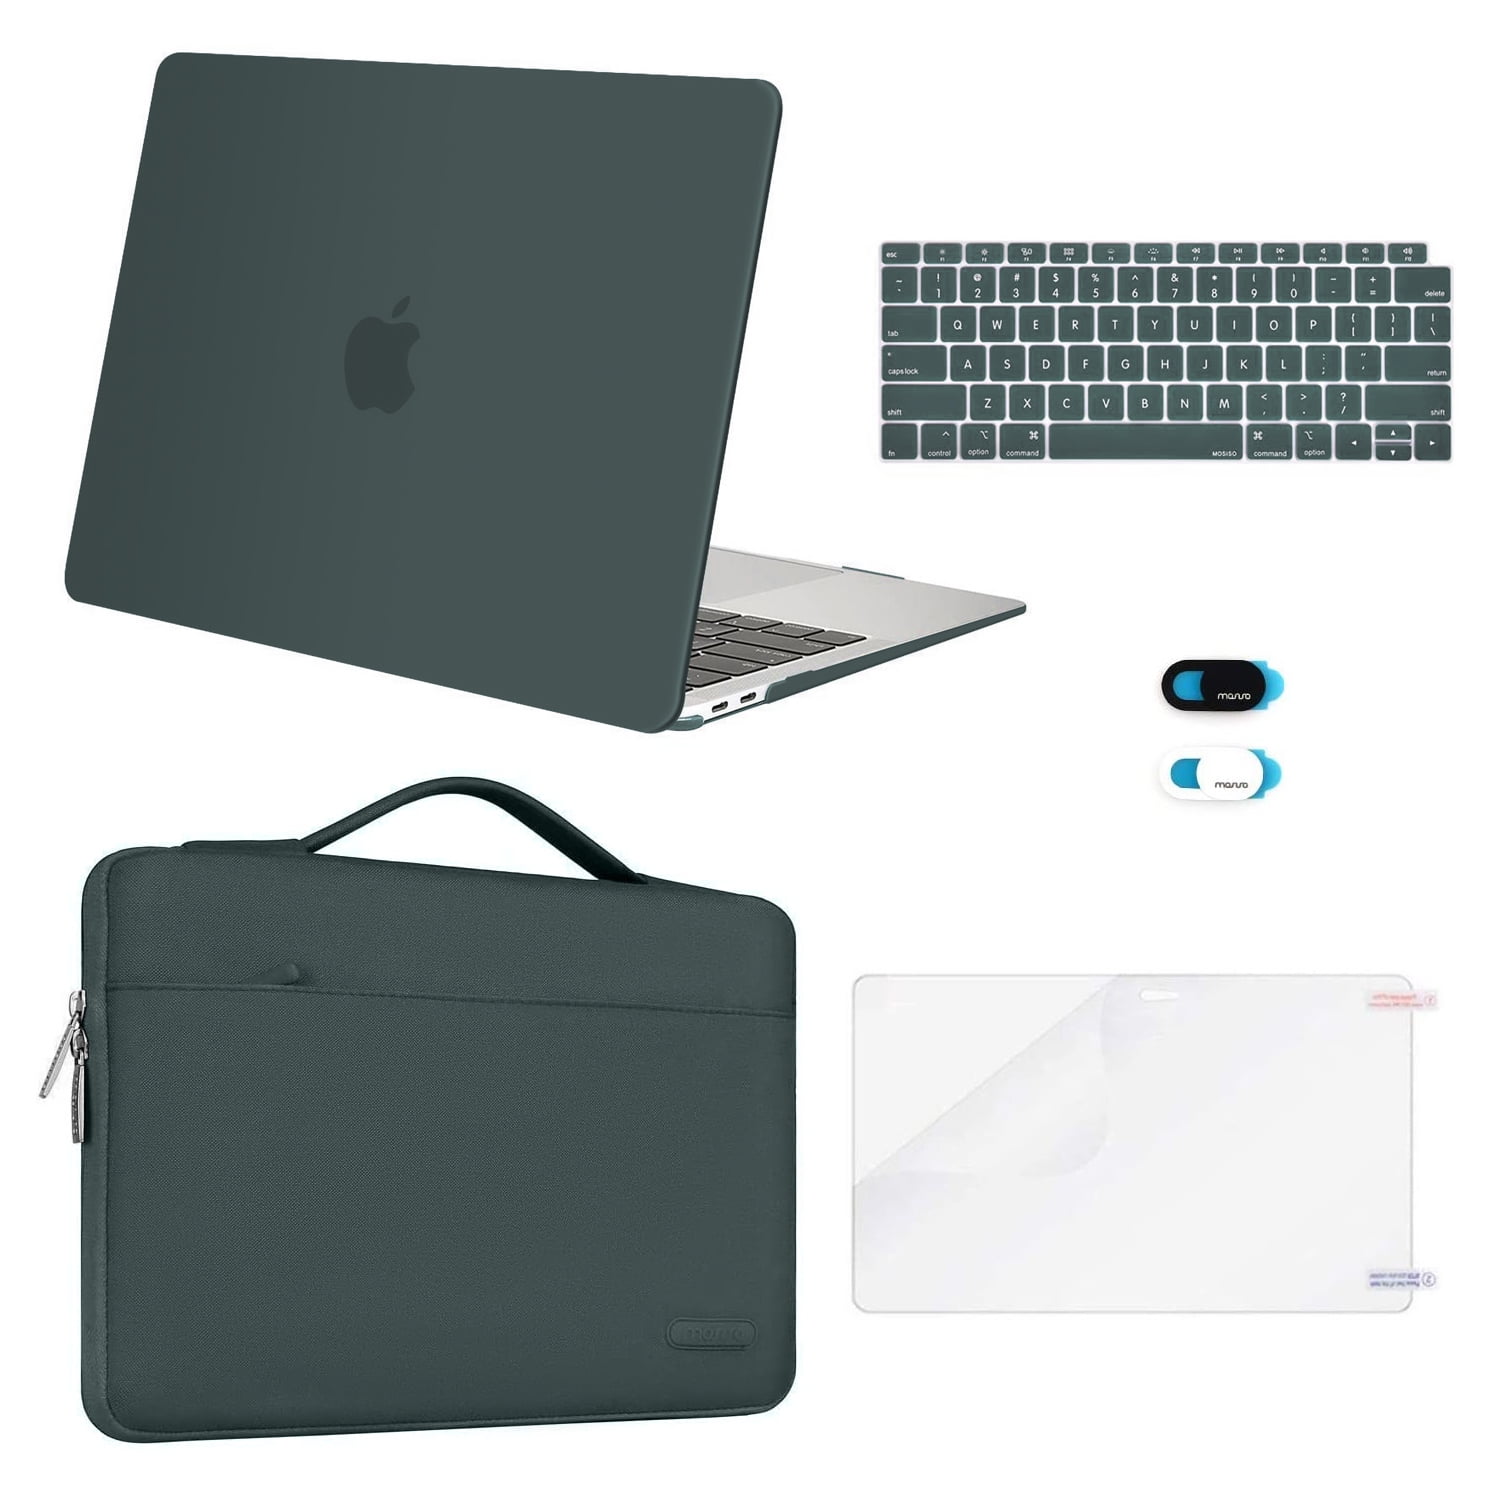 Mosiso 5 in 1 New Macbook Air 13 Inch Case A1932 2019 2018 Release 